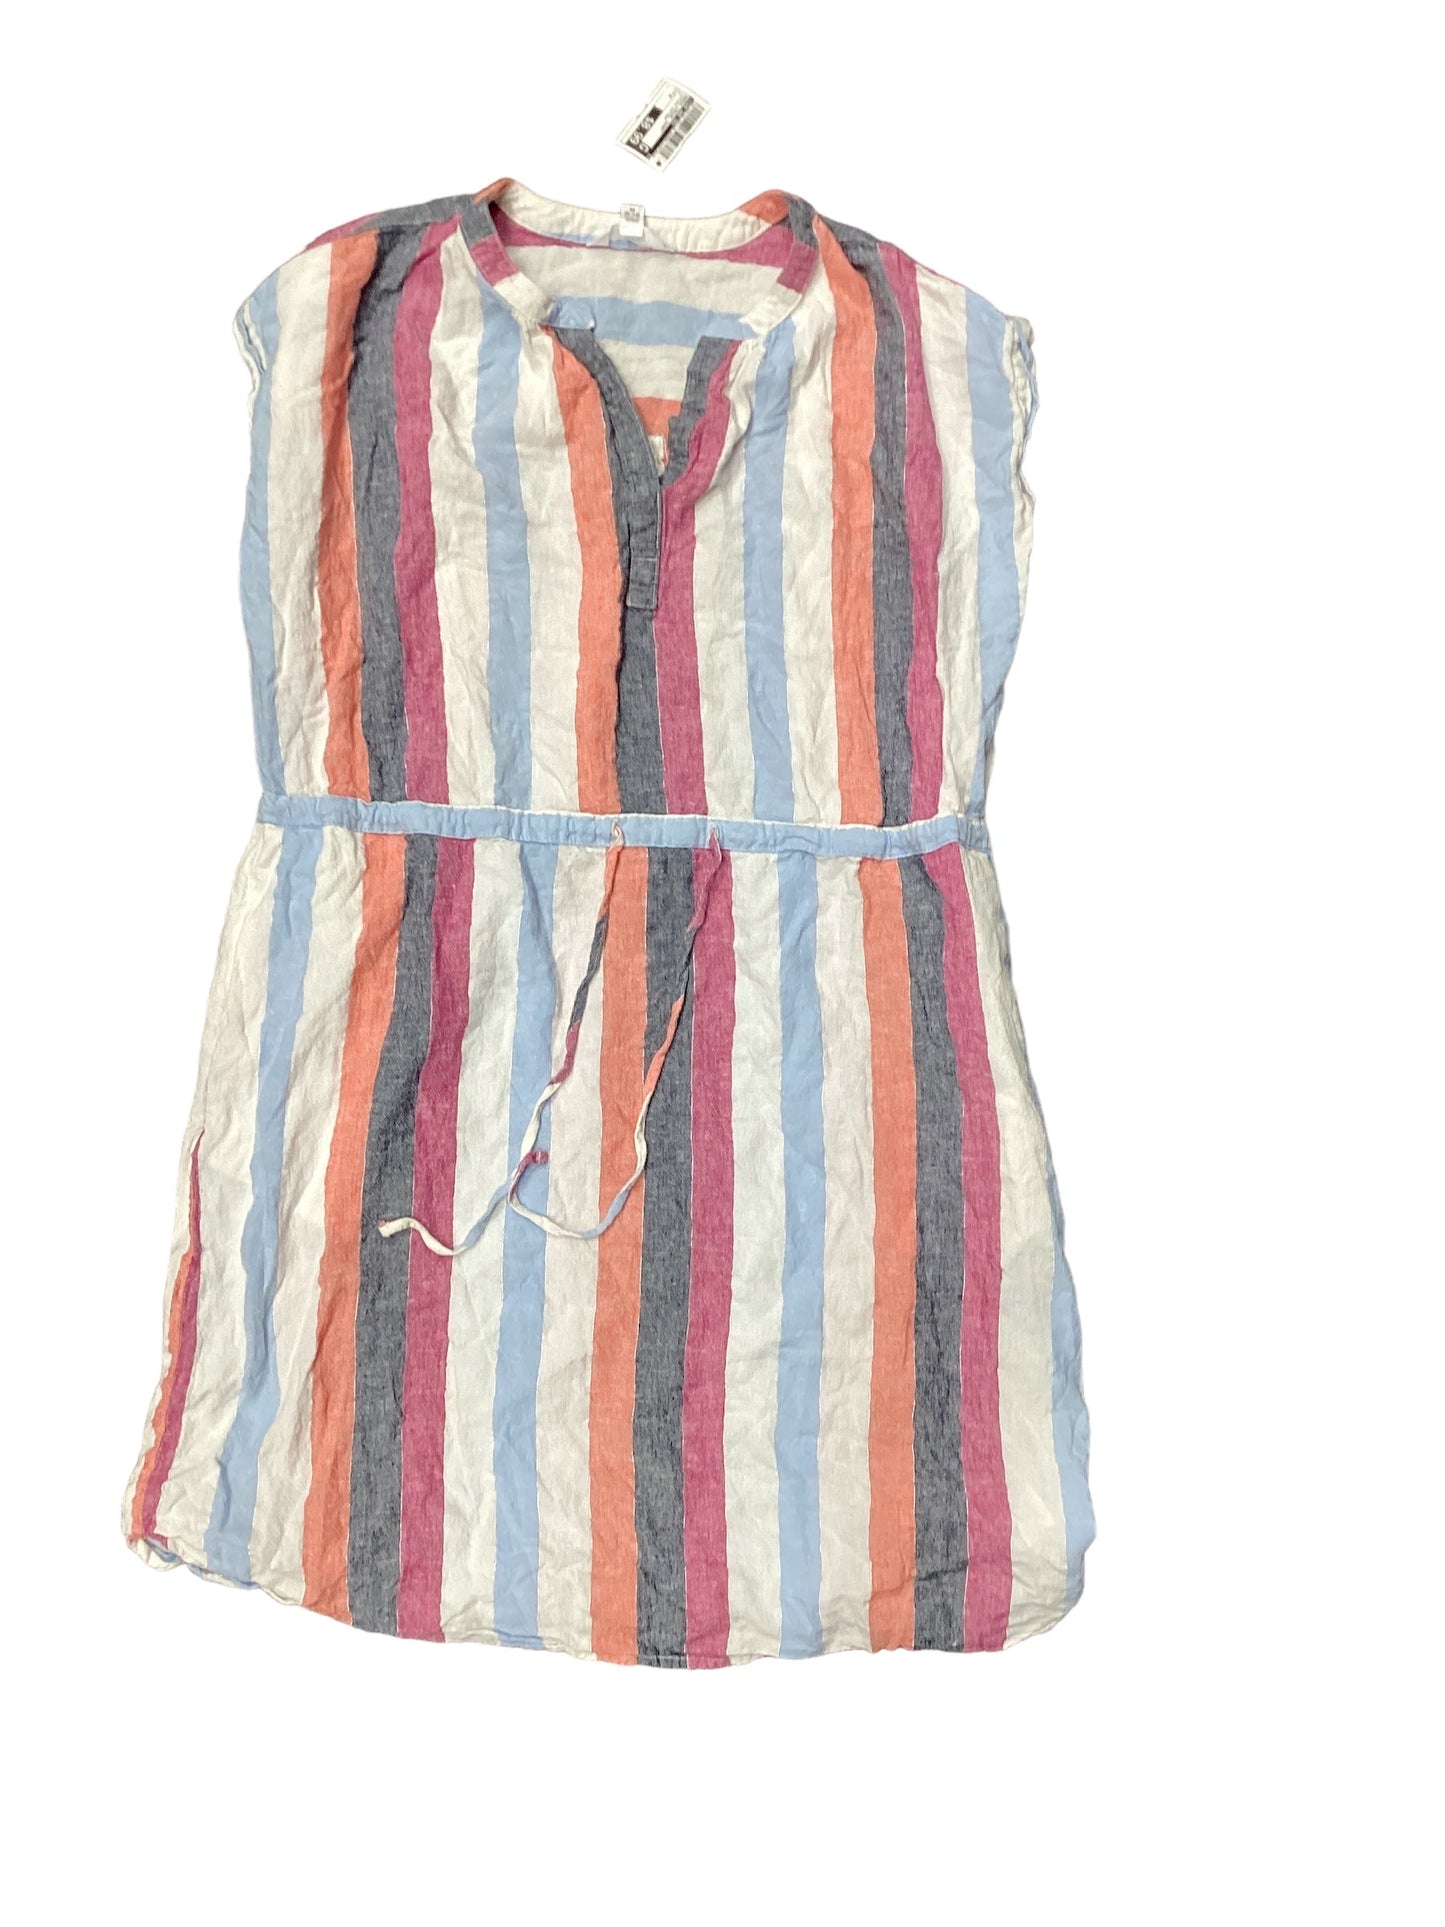 Striped Pattern Dress Casual Short Time And Tru, Size M